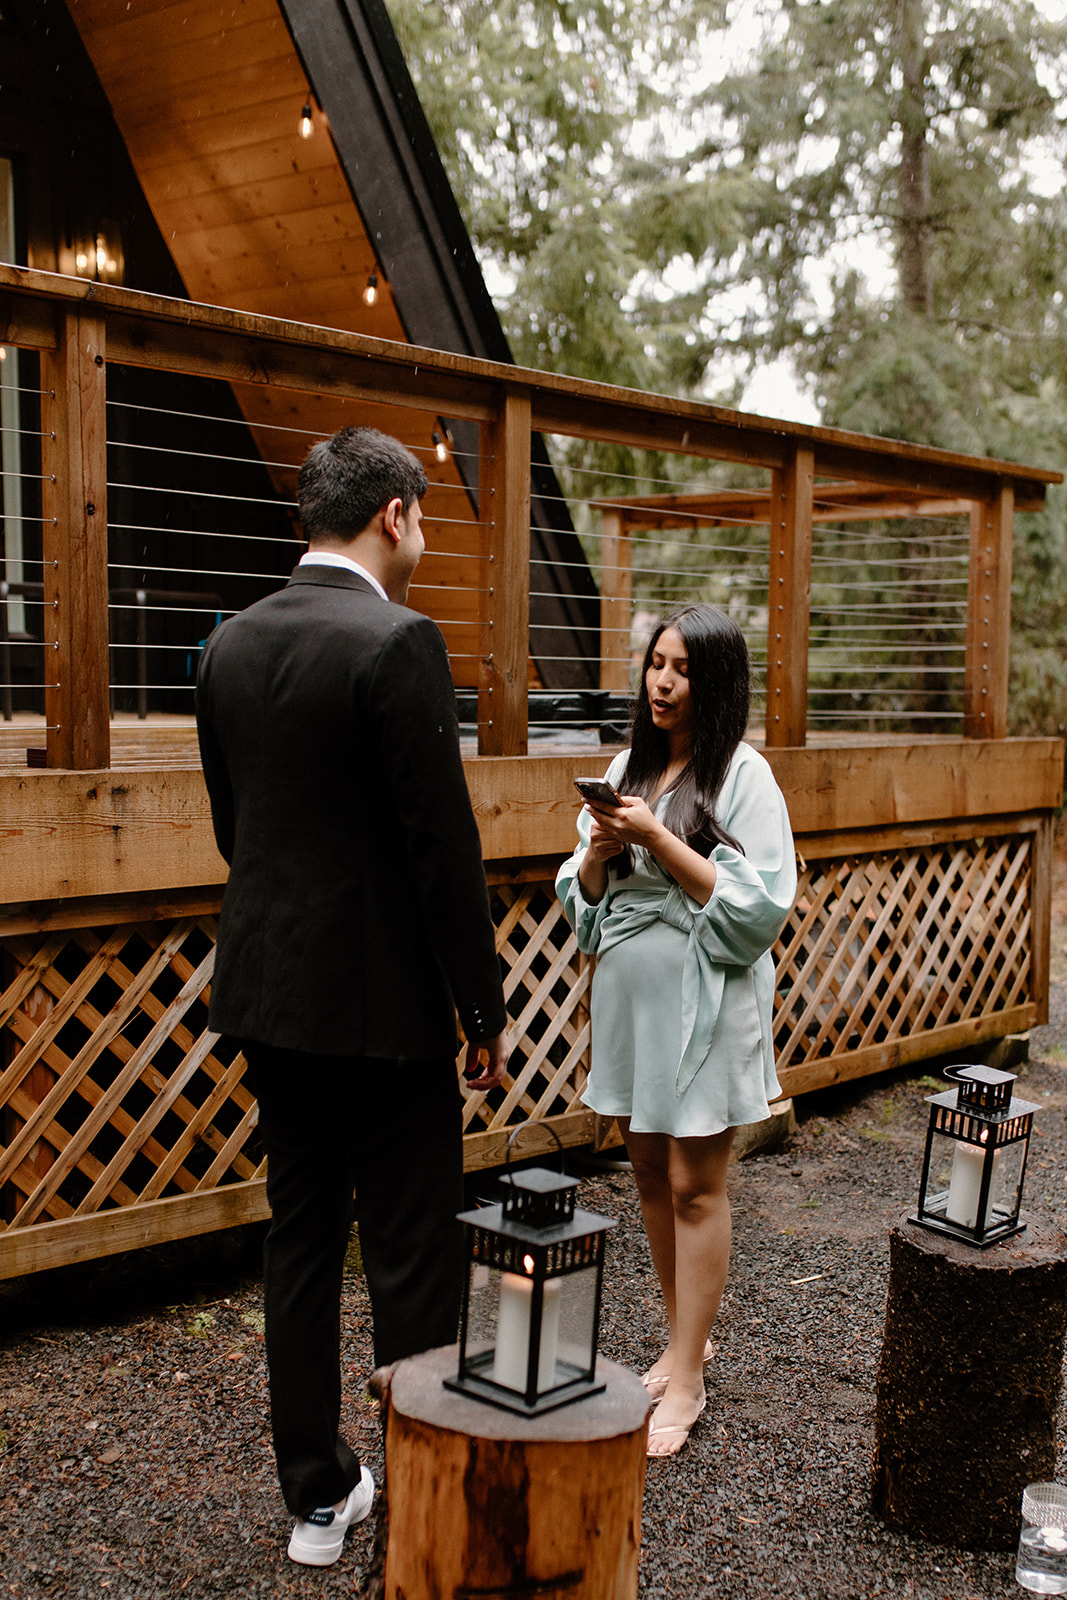 A couple share a ring exchange ceremony at an A-Frame cabin at the base of Mount Rainier to celebrate their engagement.